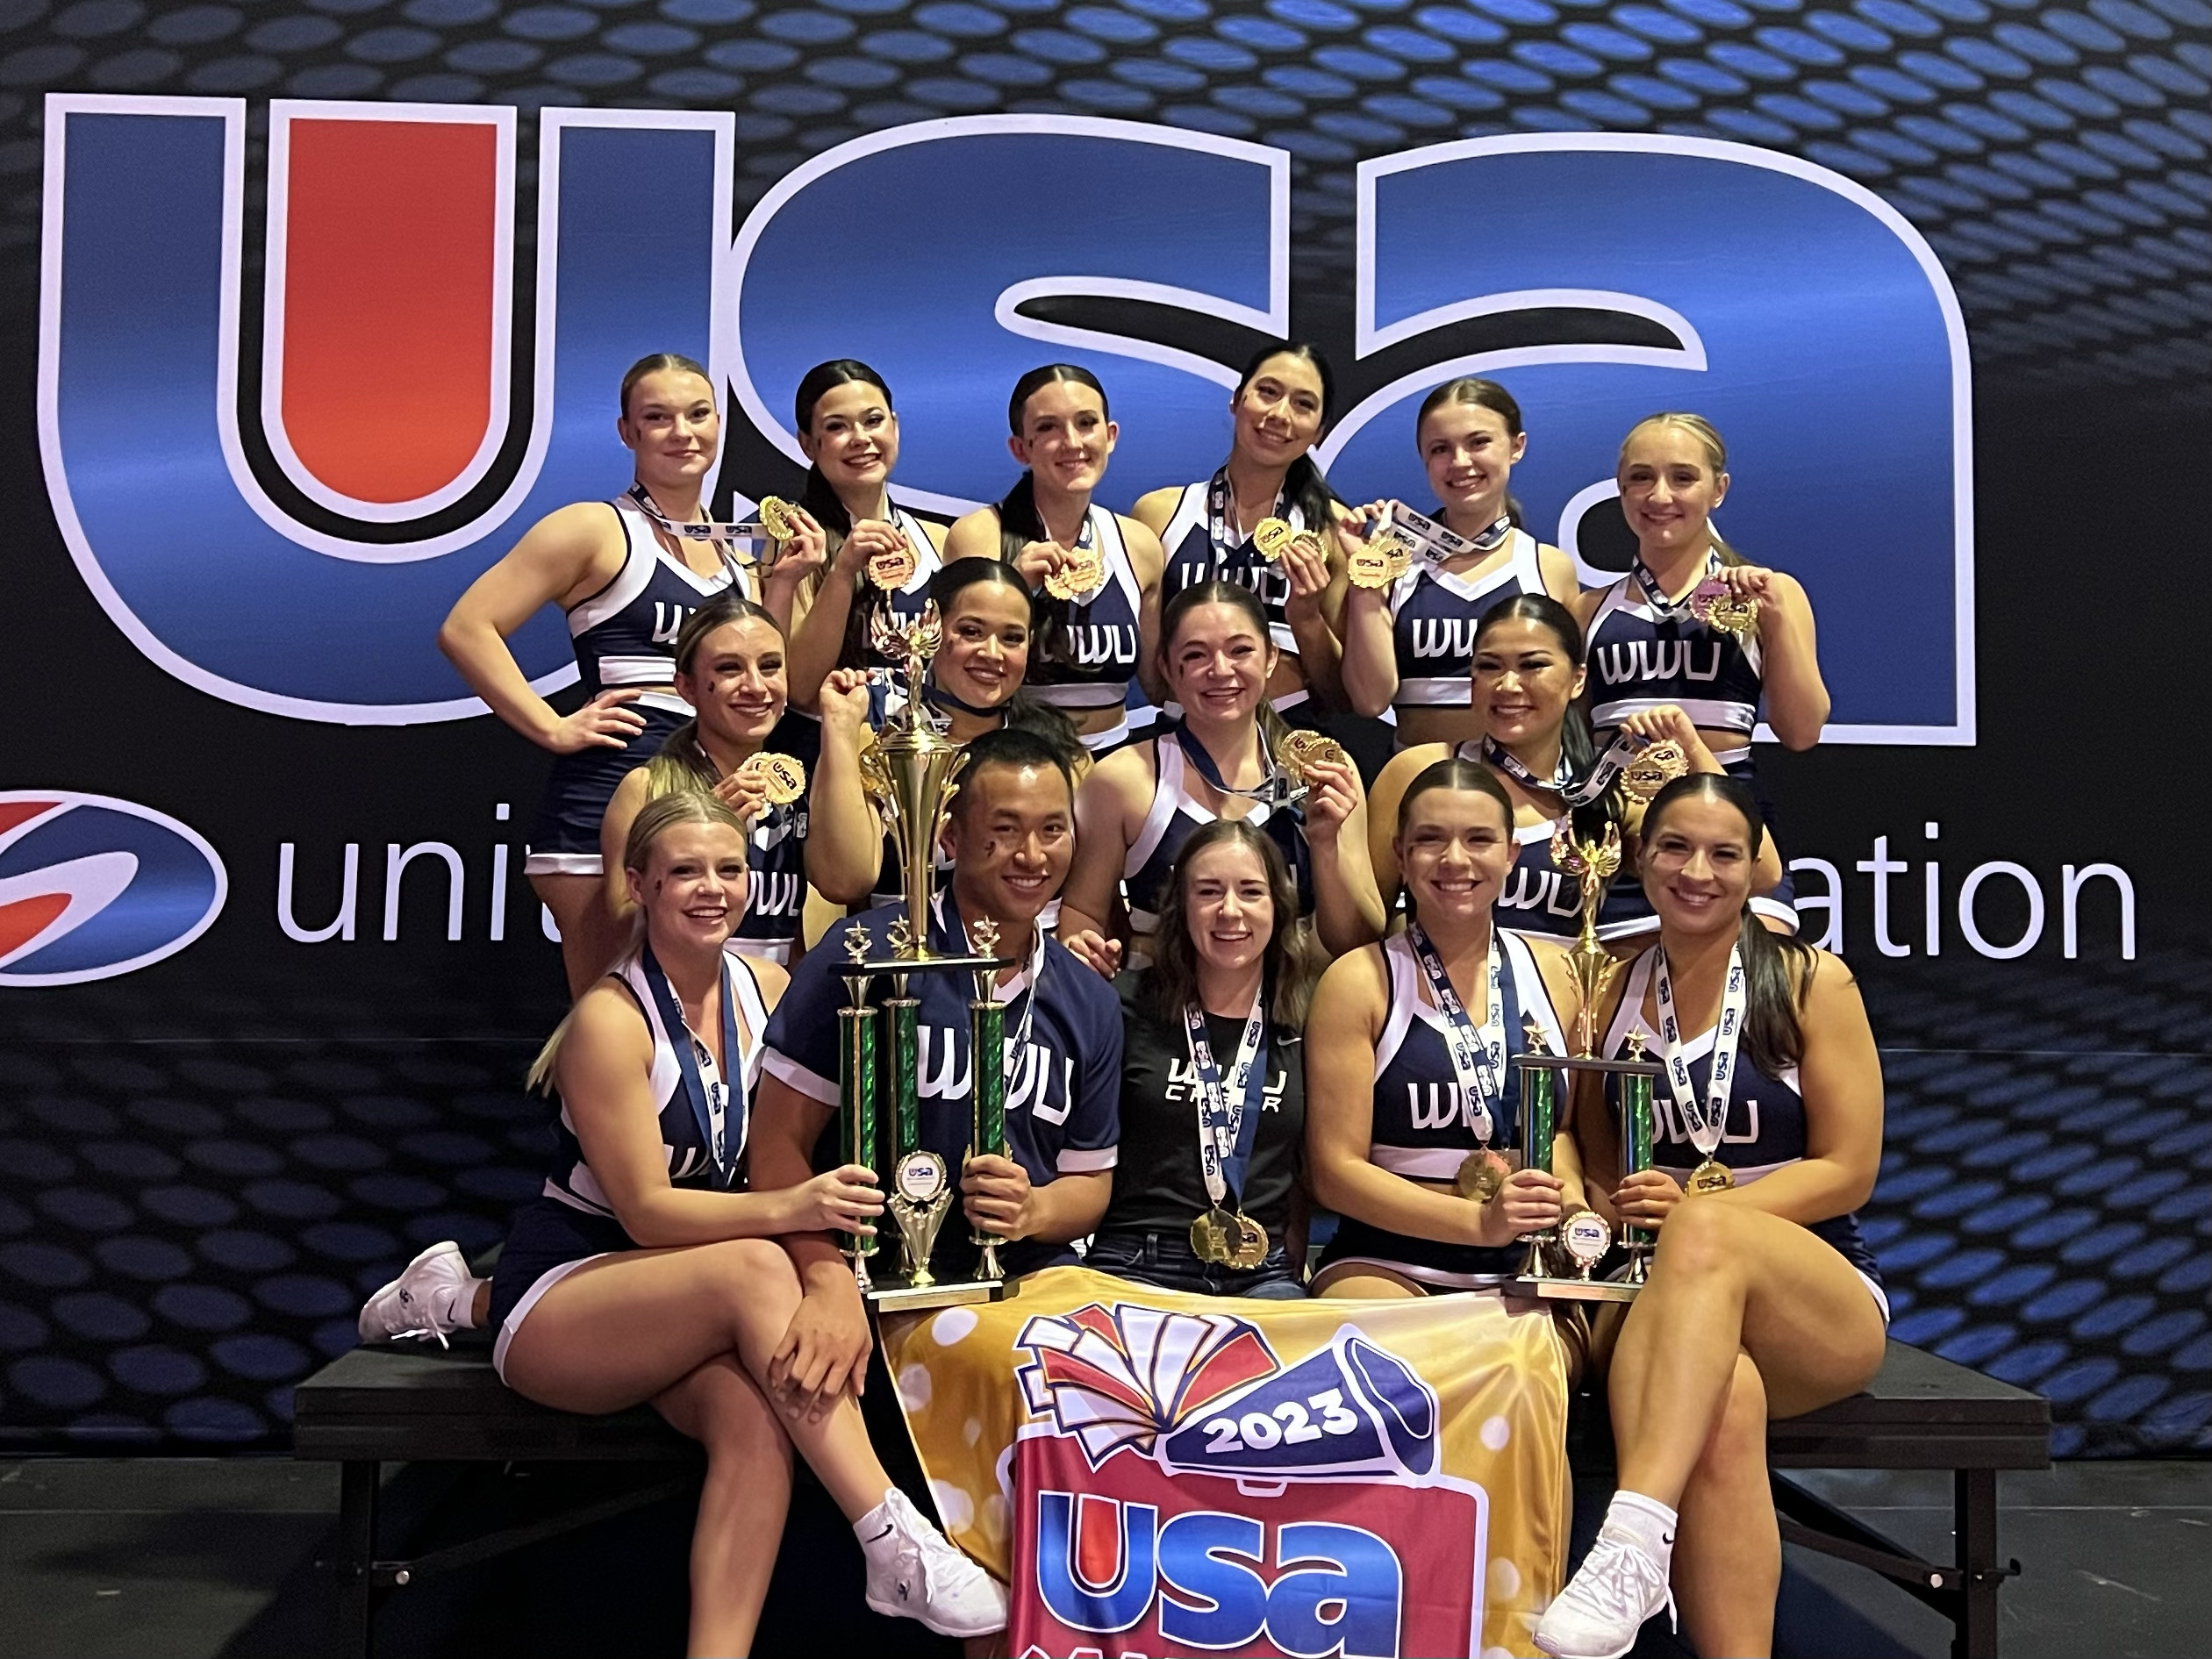 The WWU Cheer Team poses with their trophies from the National Championships